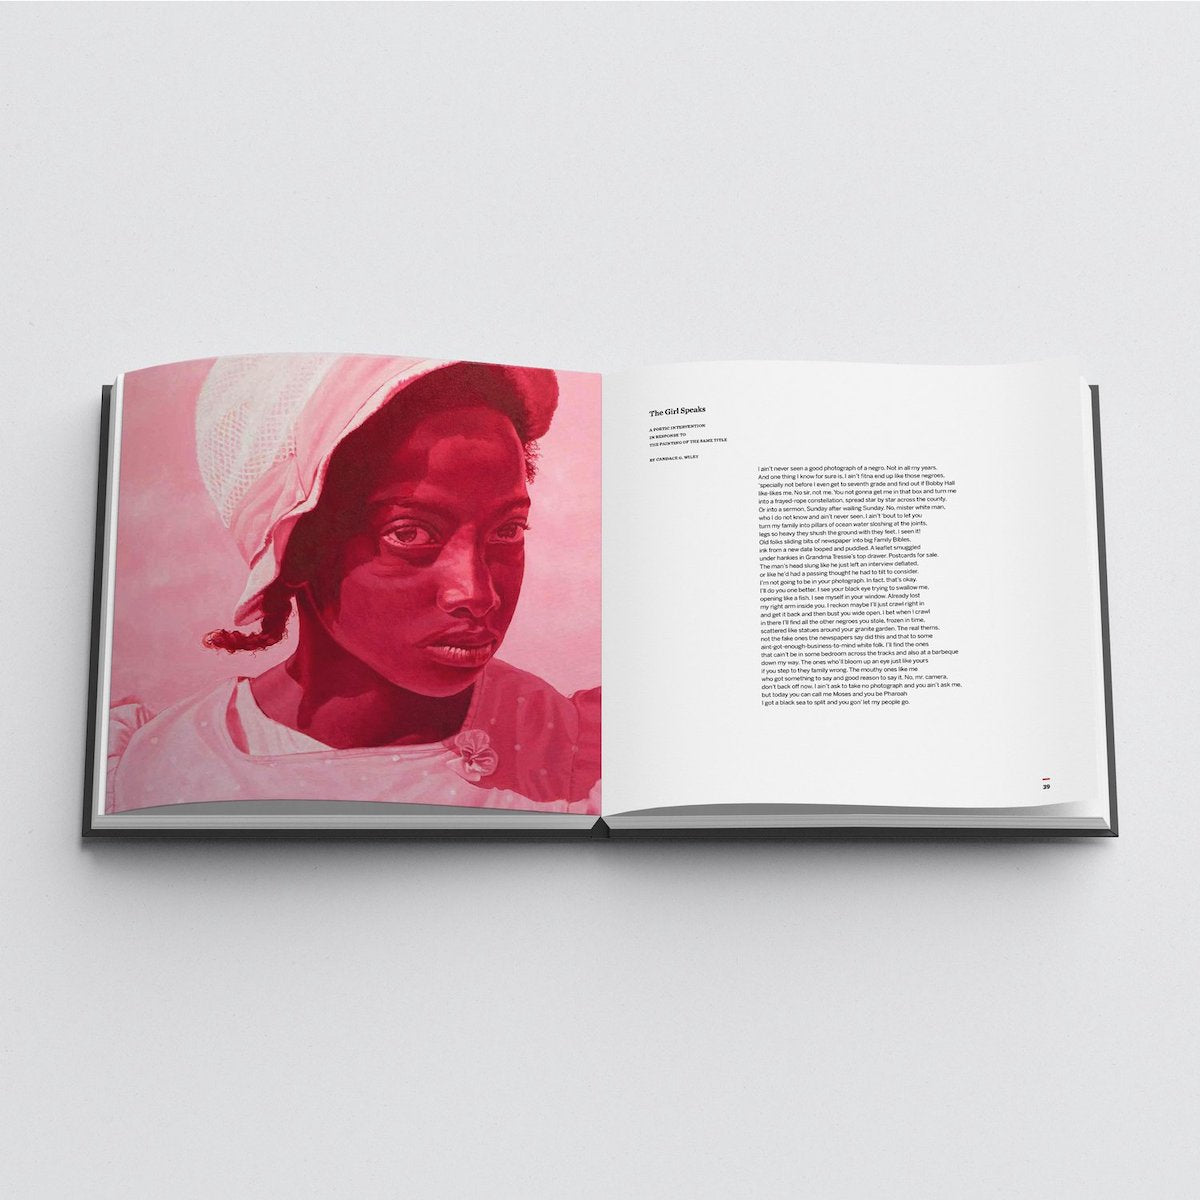 book pages, on right is painting of girl's face wearing hat painted in red tones